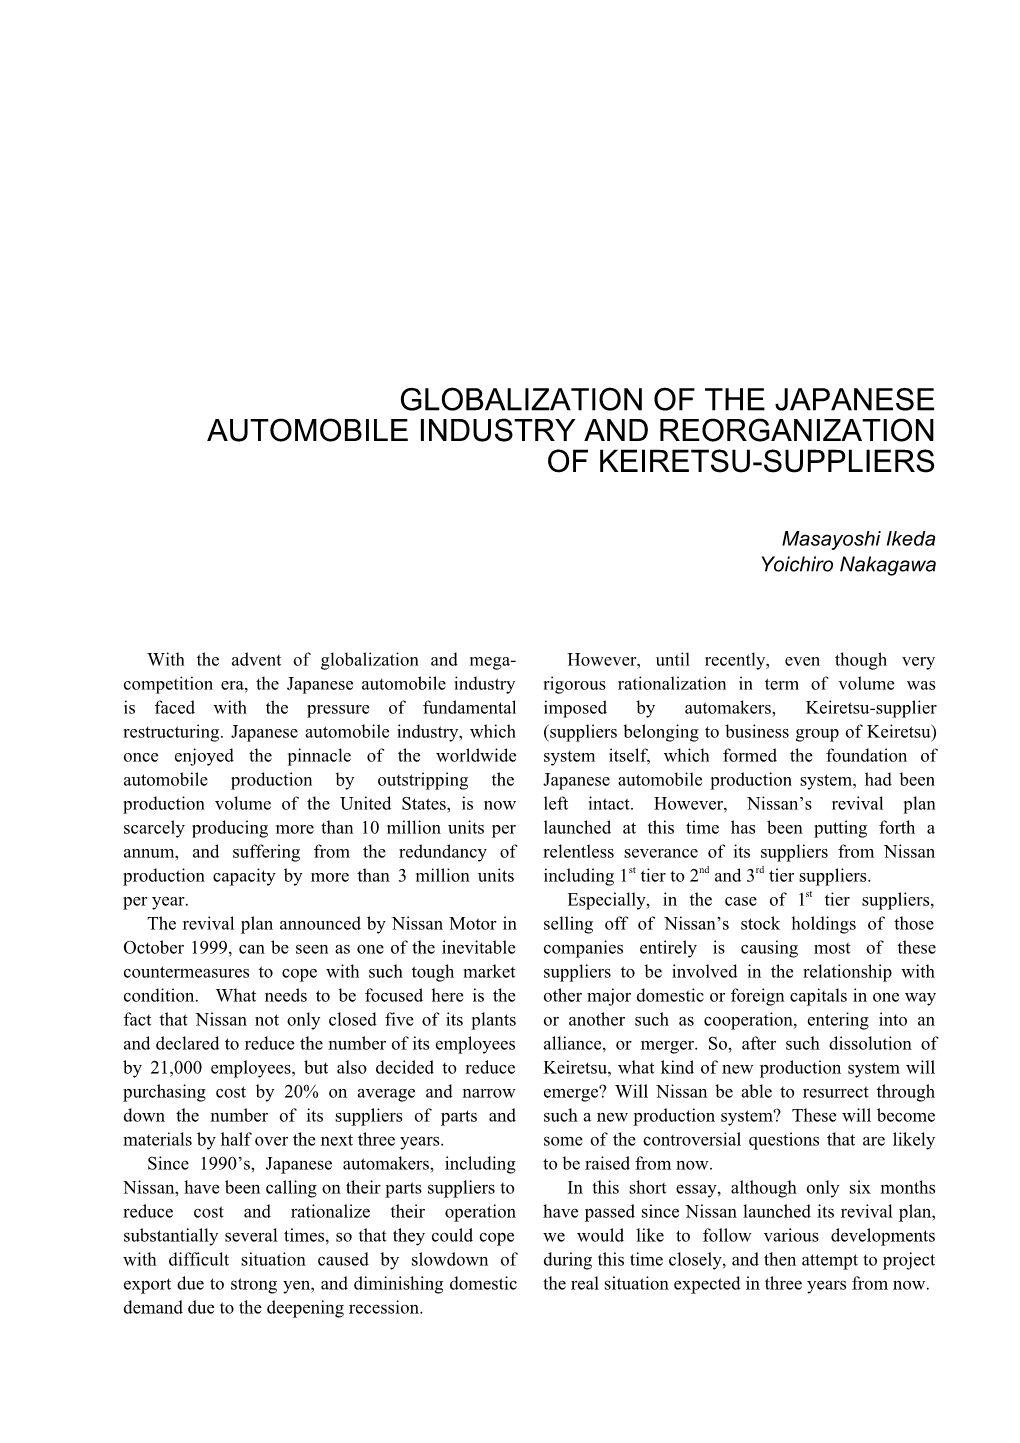 Globalization of the Japanese Automobile Industry and Reorganization of Keiretsu-Suppliers